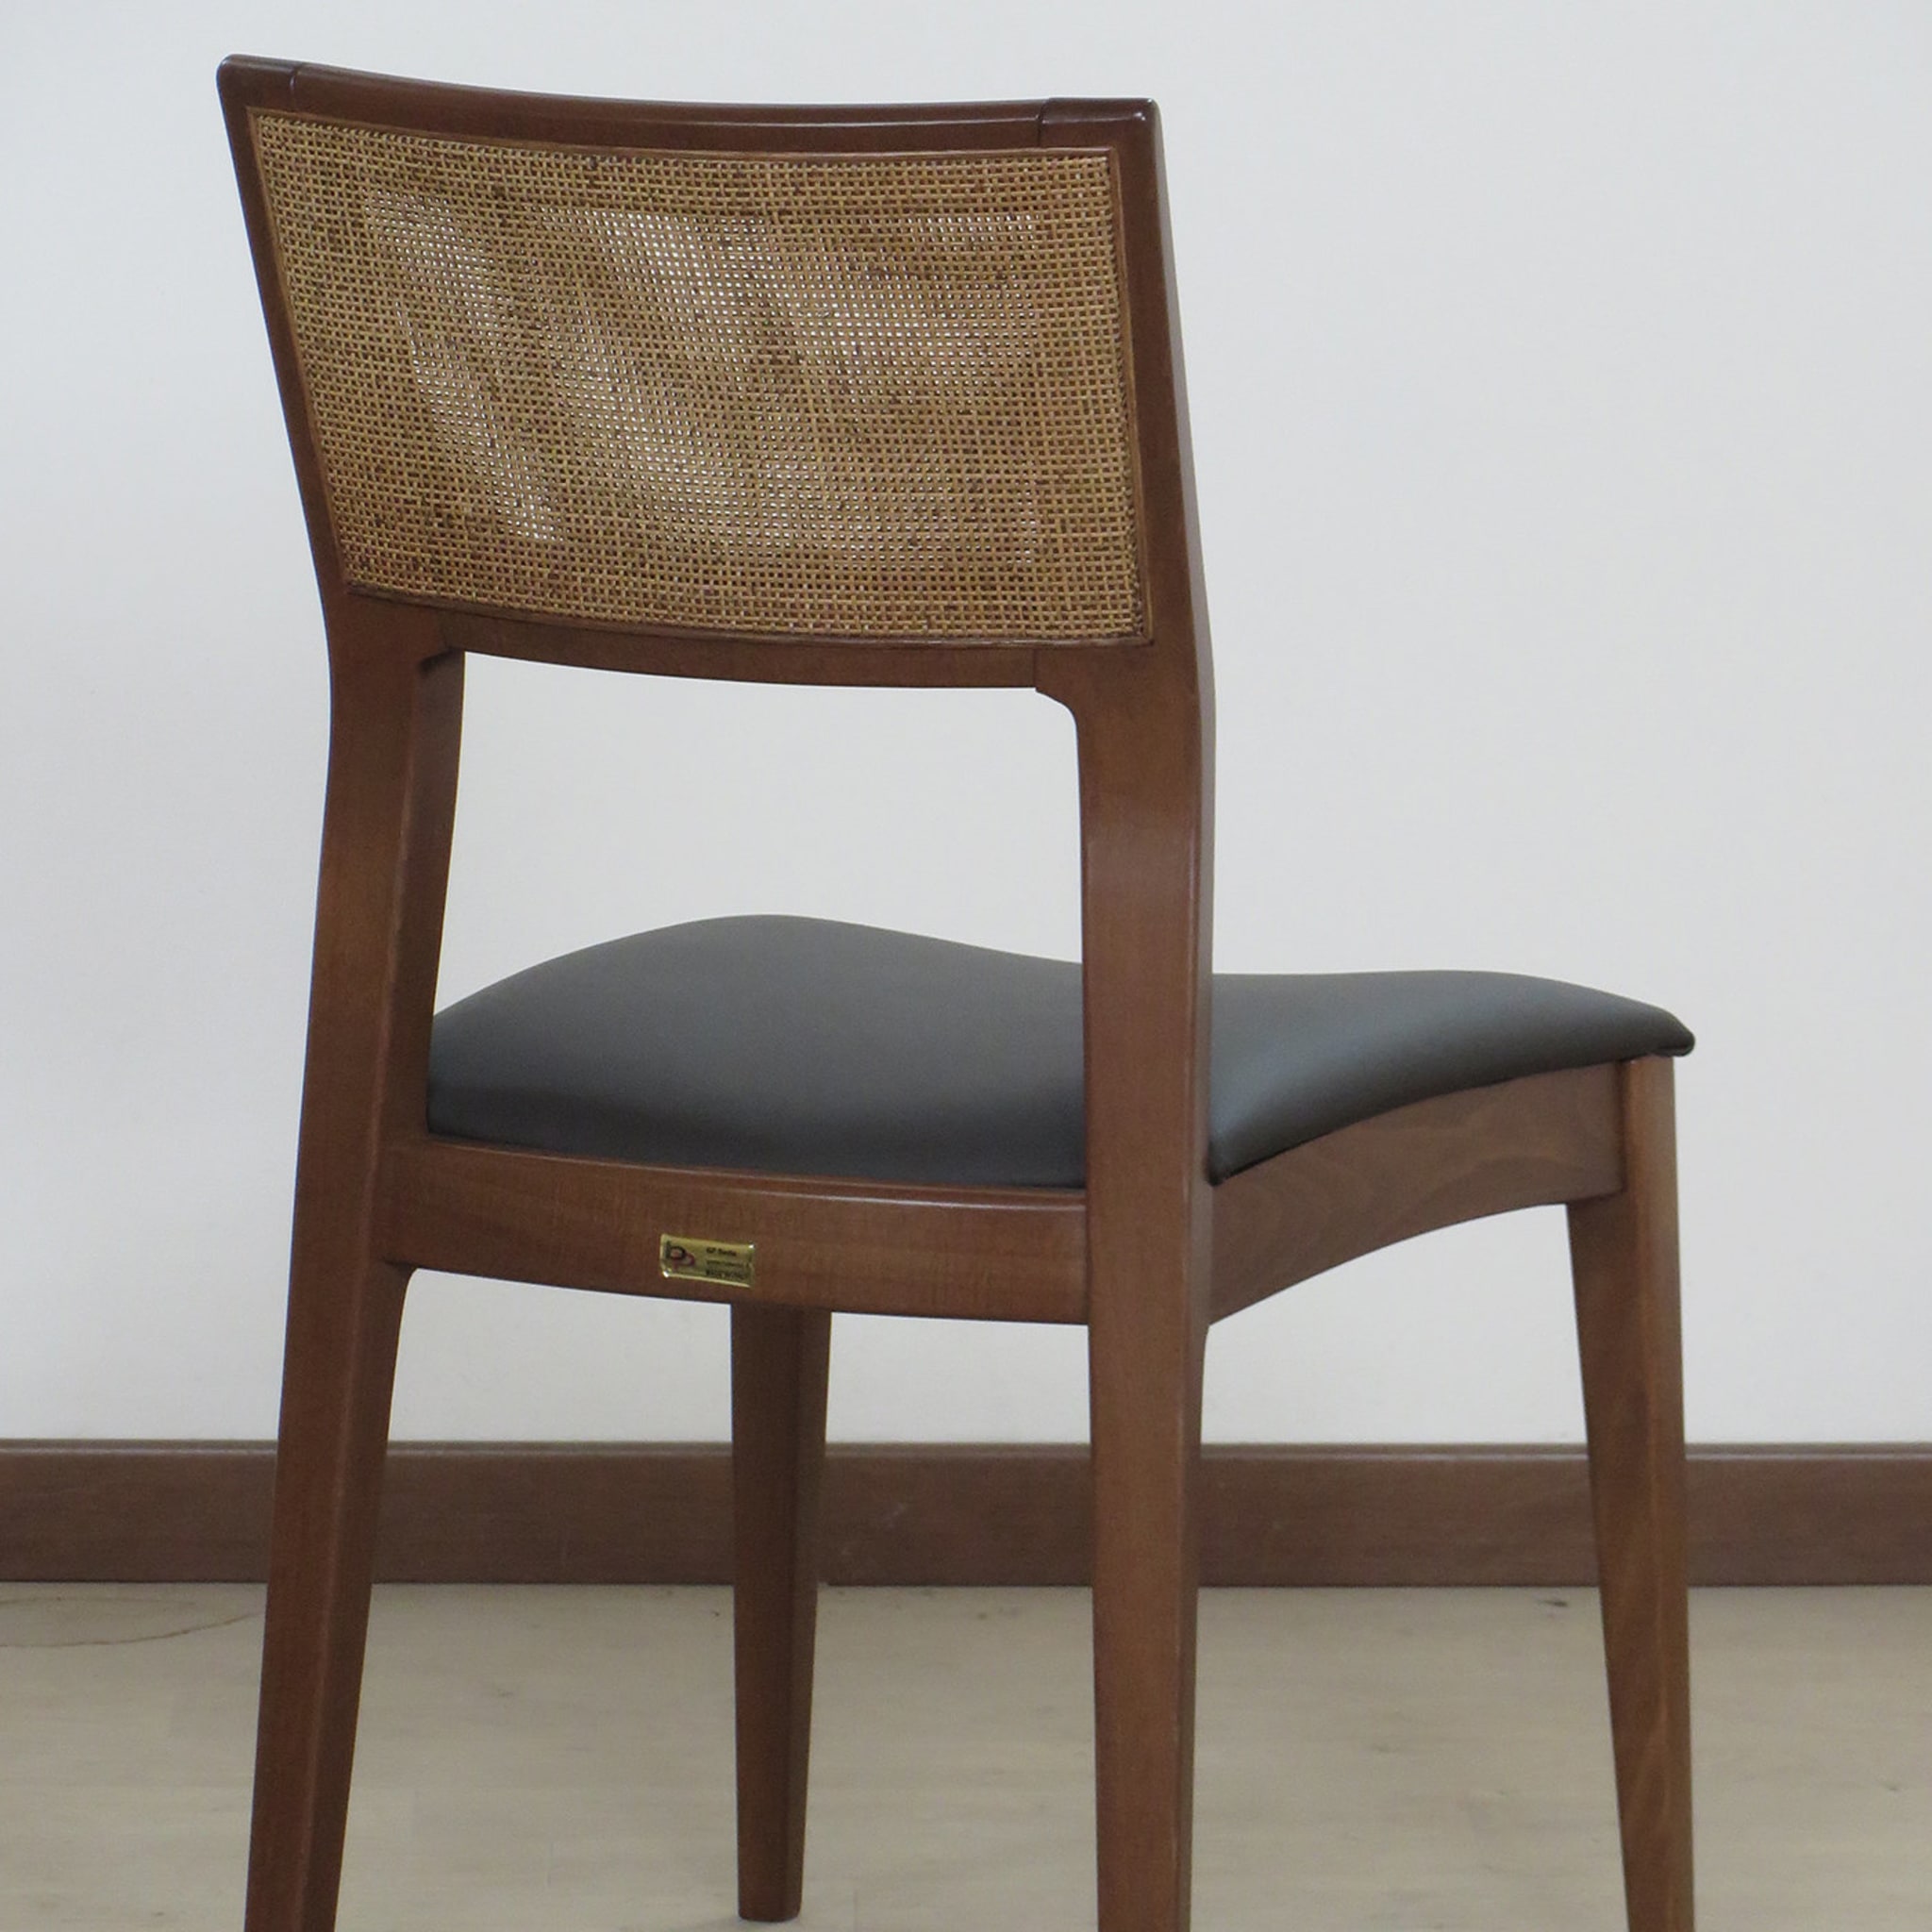 DOM-6 Set of 2 Chairs - Alternative view 3